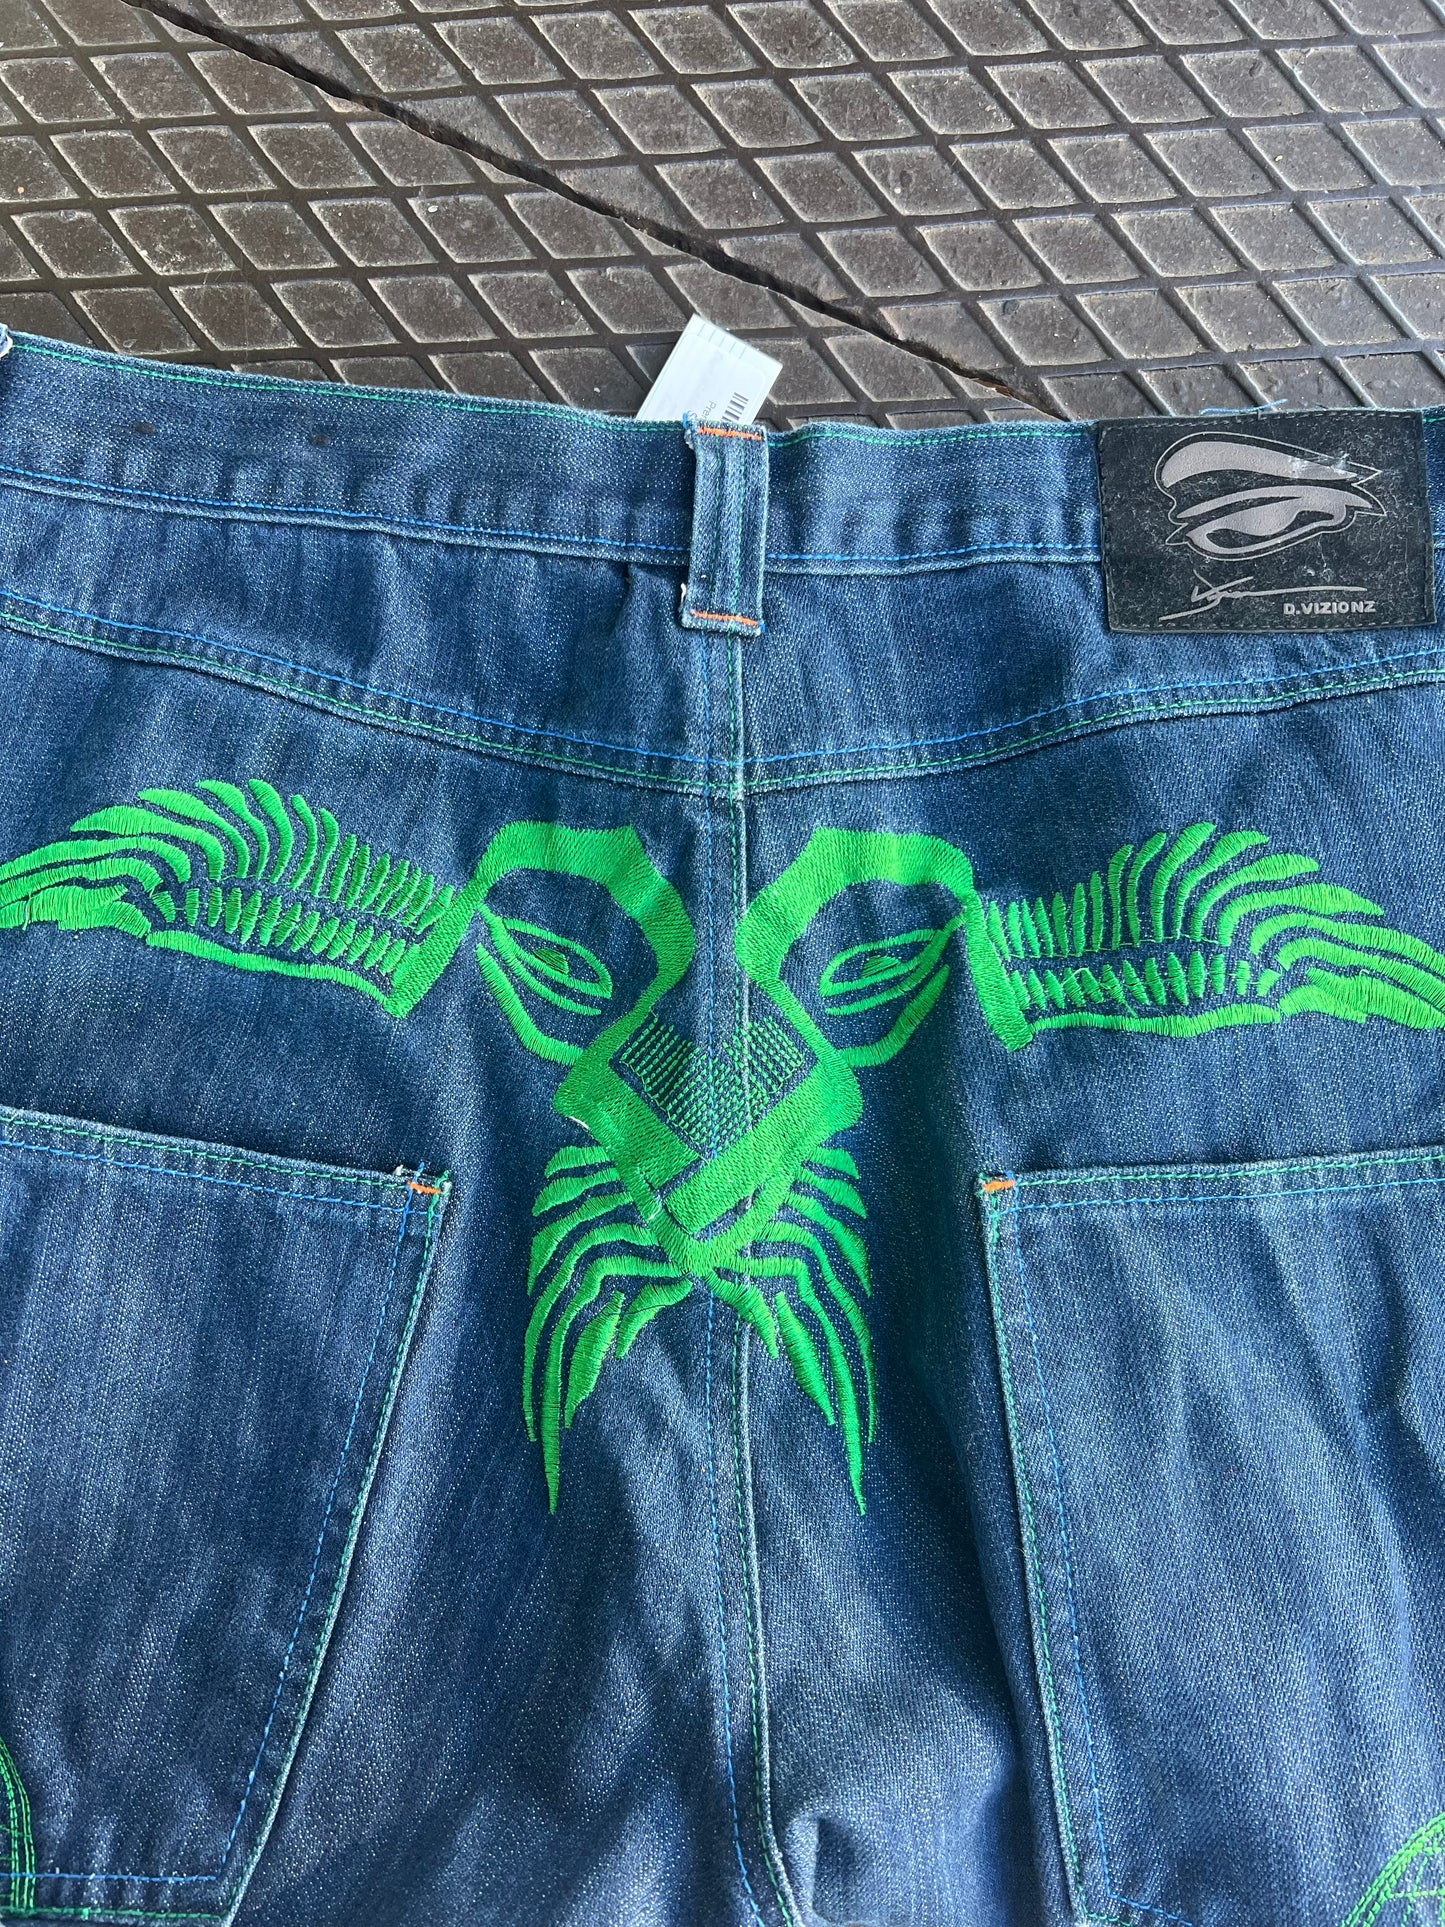 40 - D.Vizionz Embroidered Lion Rear Shorts